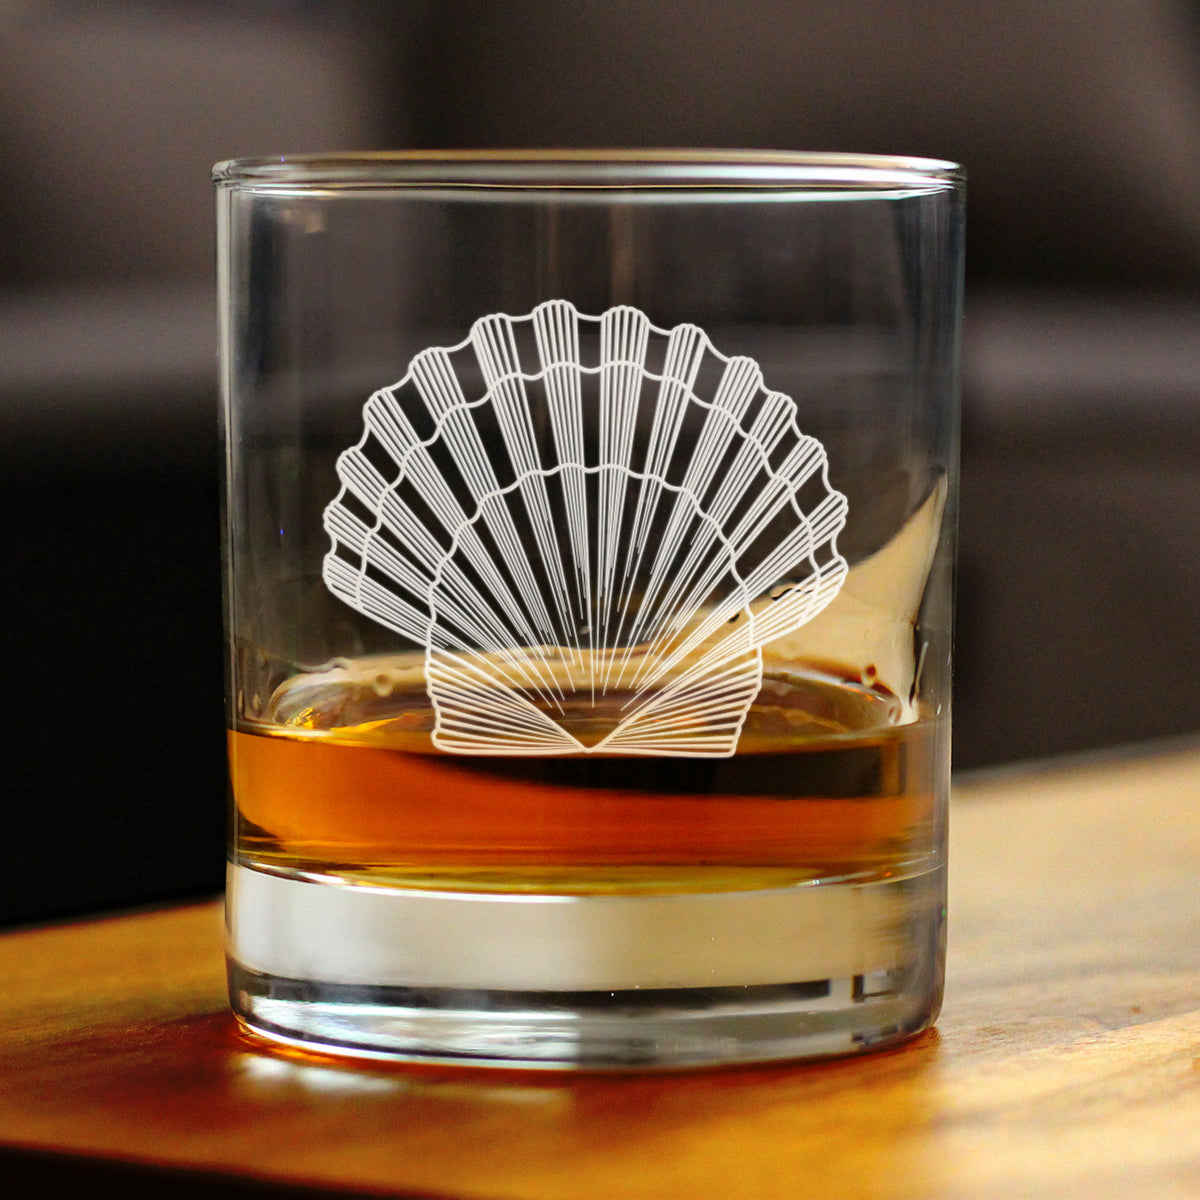 Seashell Engraved Whiskey Rocks Glass, Unique Decorative Gift for Beach House, Nautical Decor Birthday Gifts with Seashells